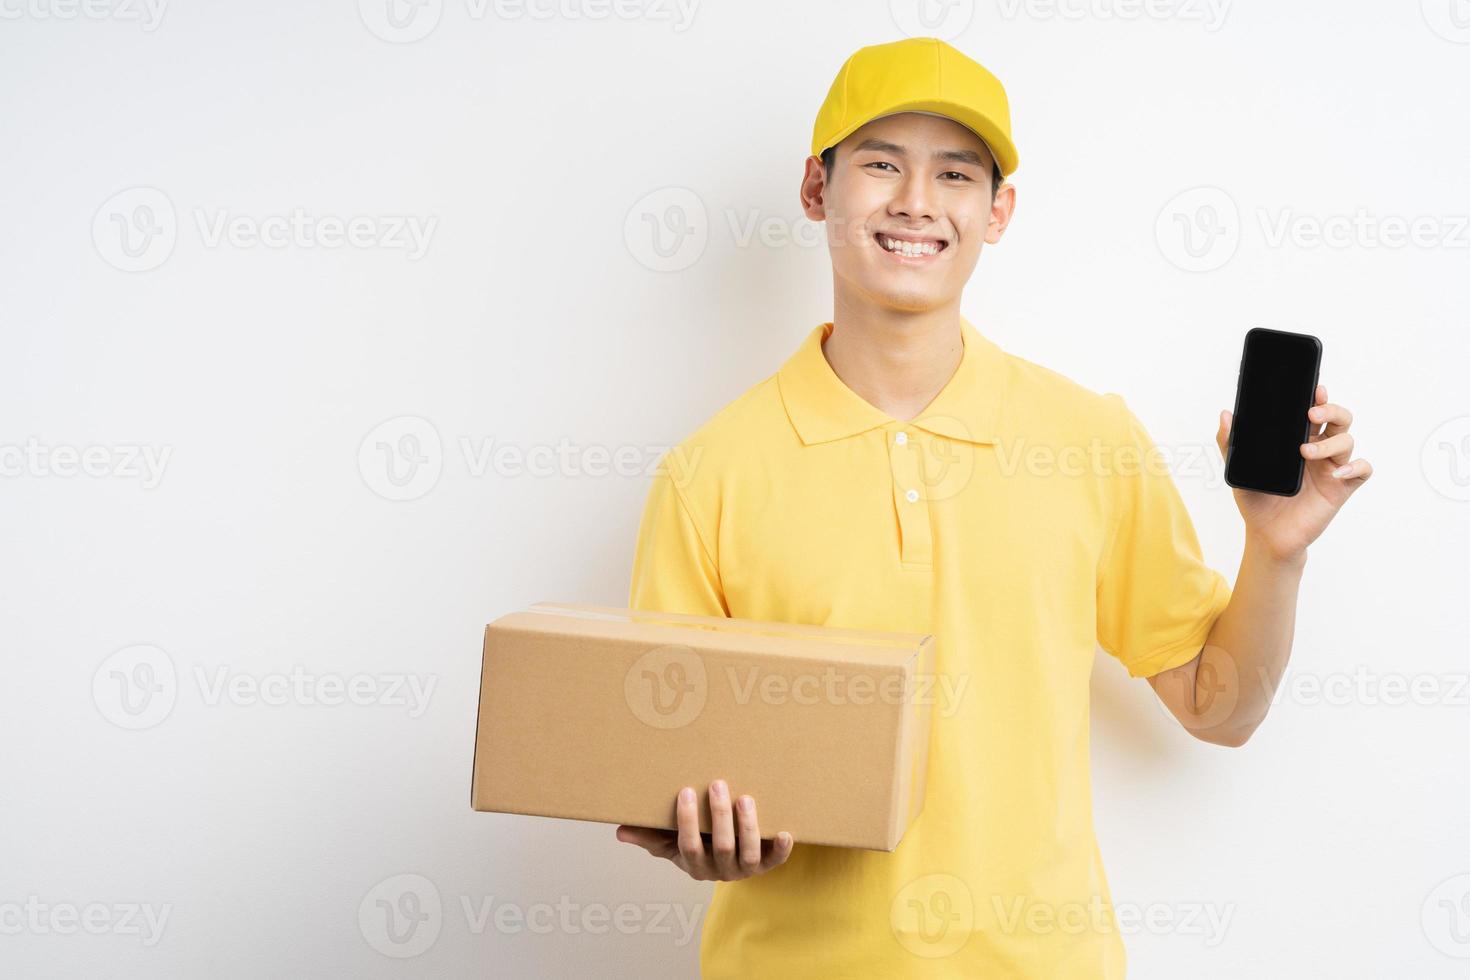 Asian man in a yellow uniform holding a phone and holding a package in one hand photo